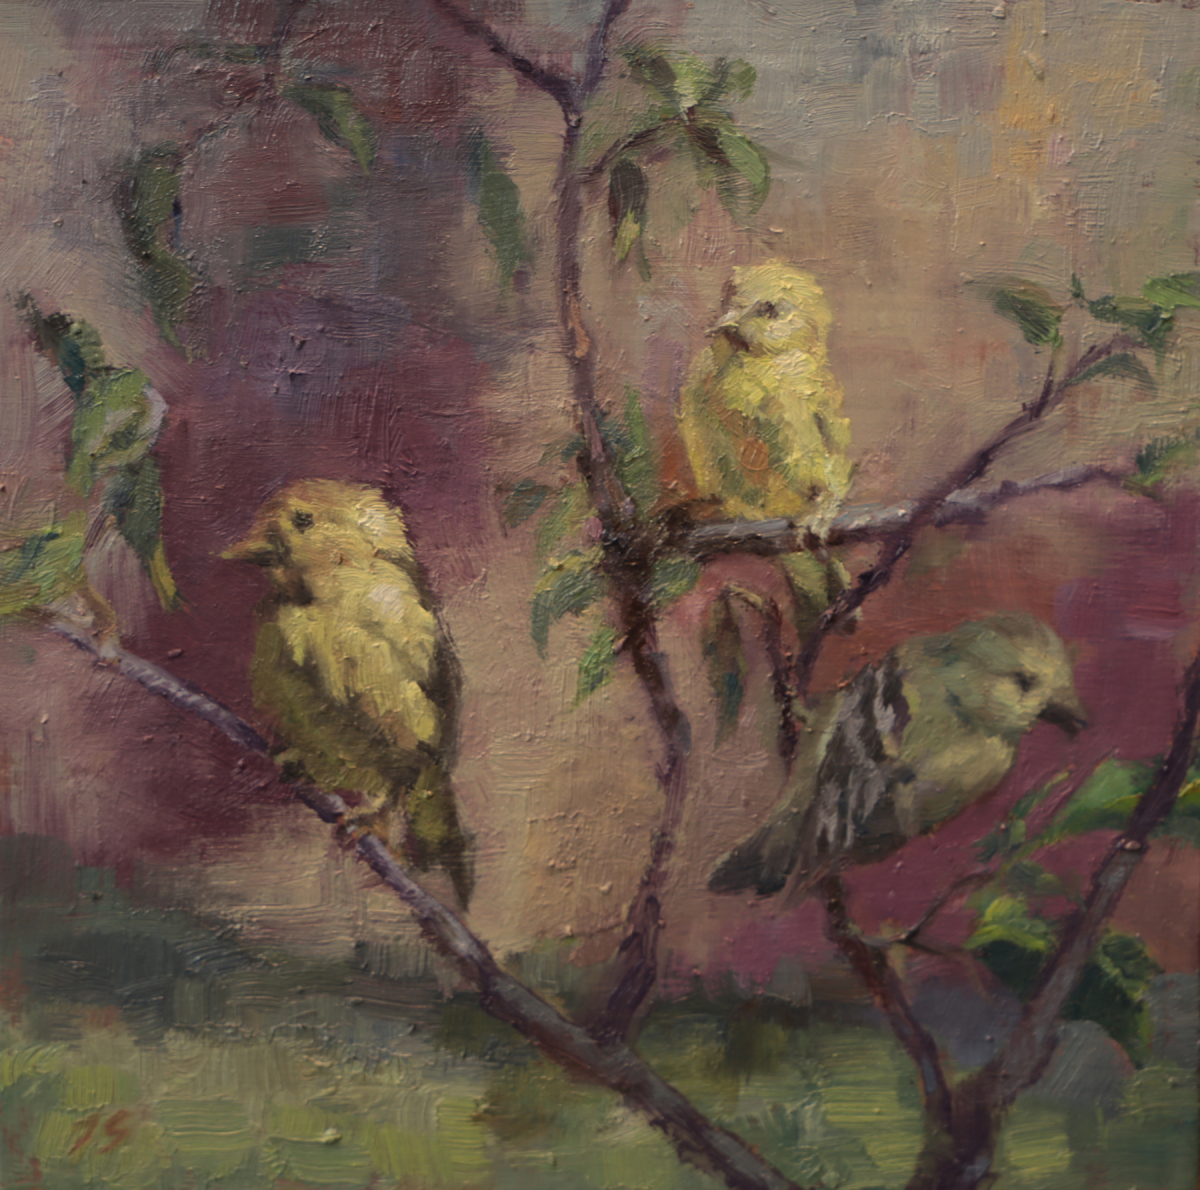 The Three Finches